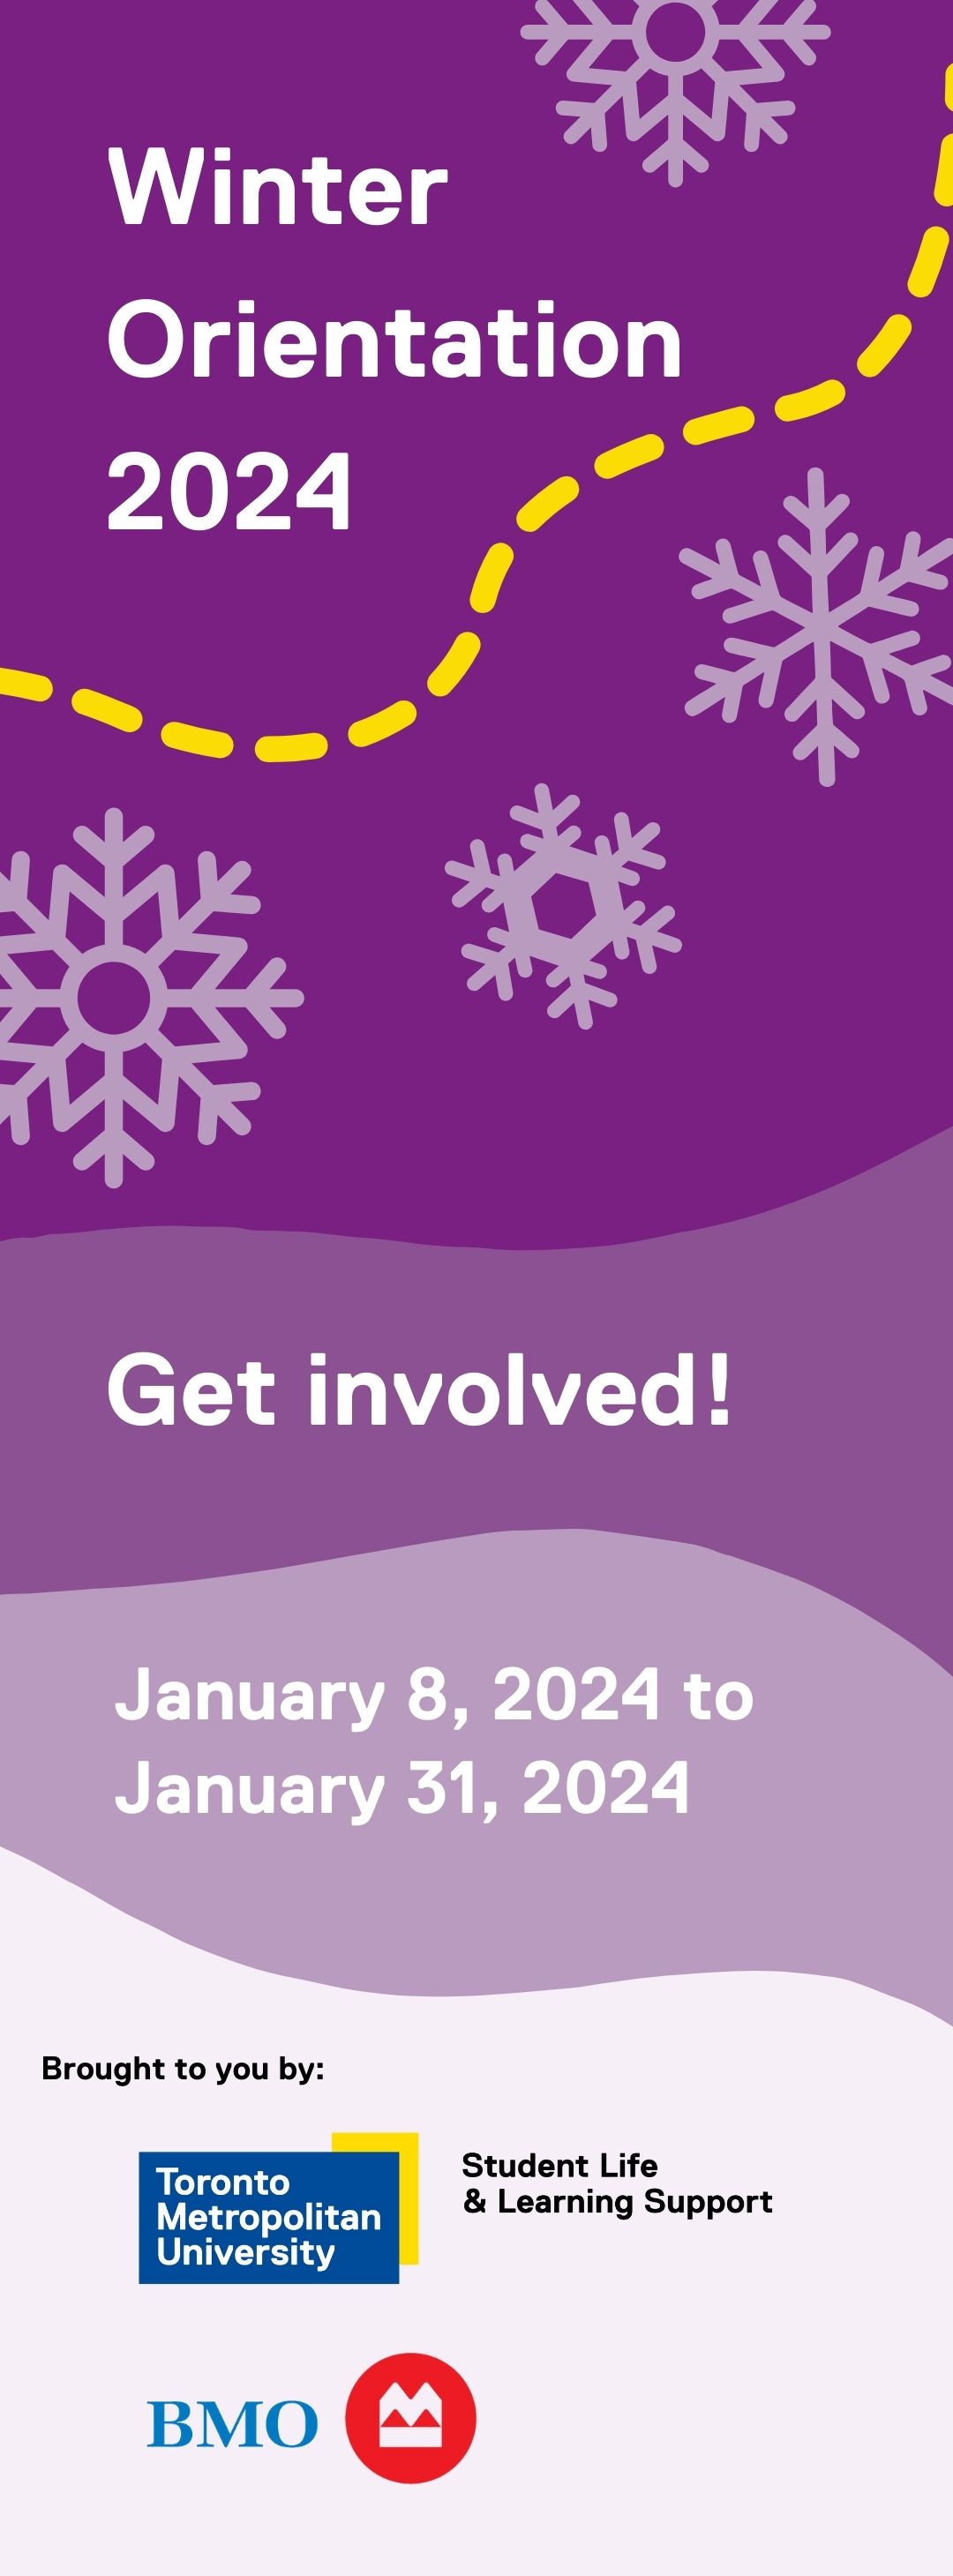 Winter Orientation 2024. Get involved from January 8th to JUanuary 31, 2024. Brought to you by TMU Student Life and Learning Support with the support of BMO